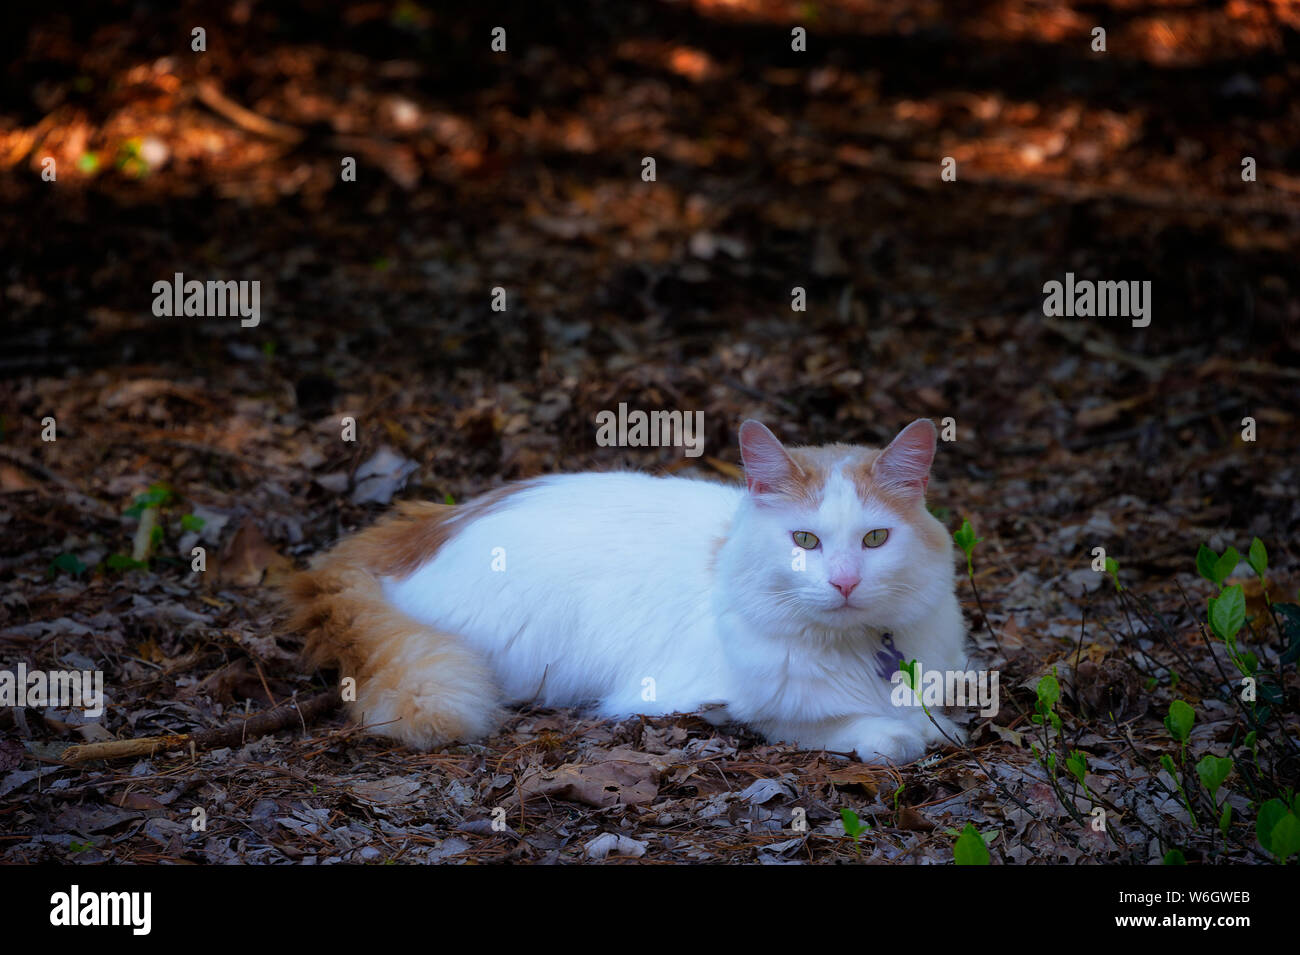 A white and orange pet cat lays in the edge of a forest. Stock Photo